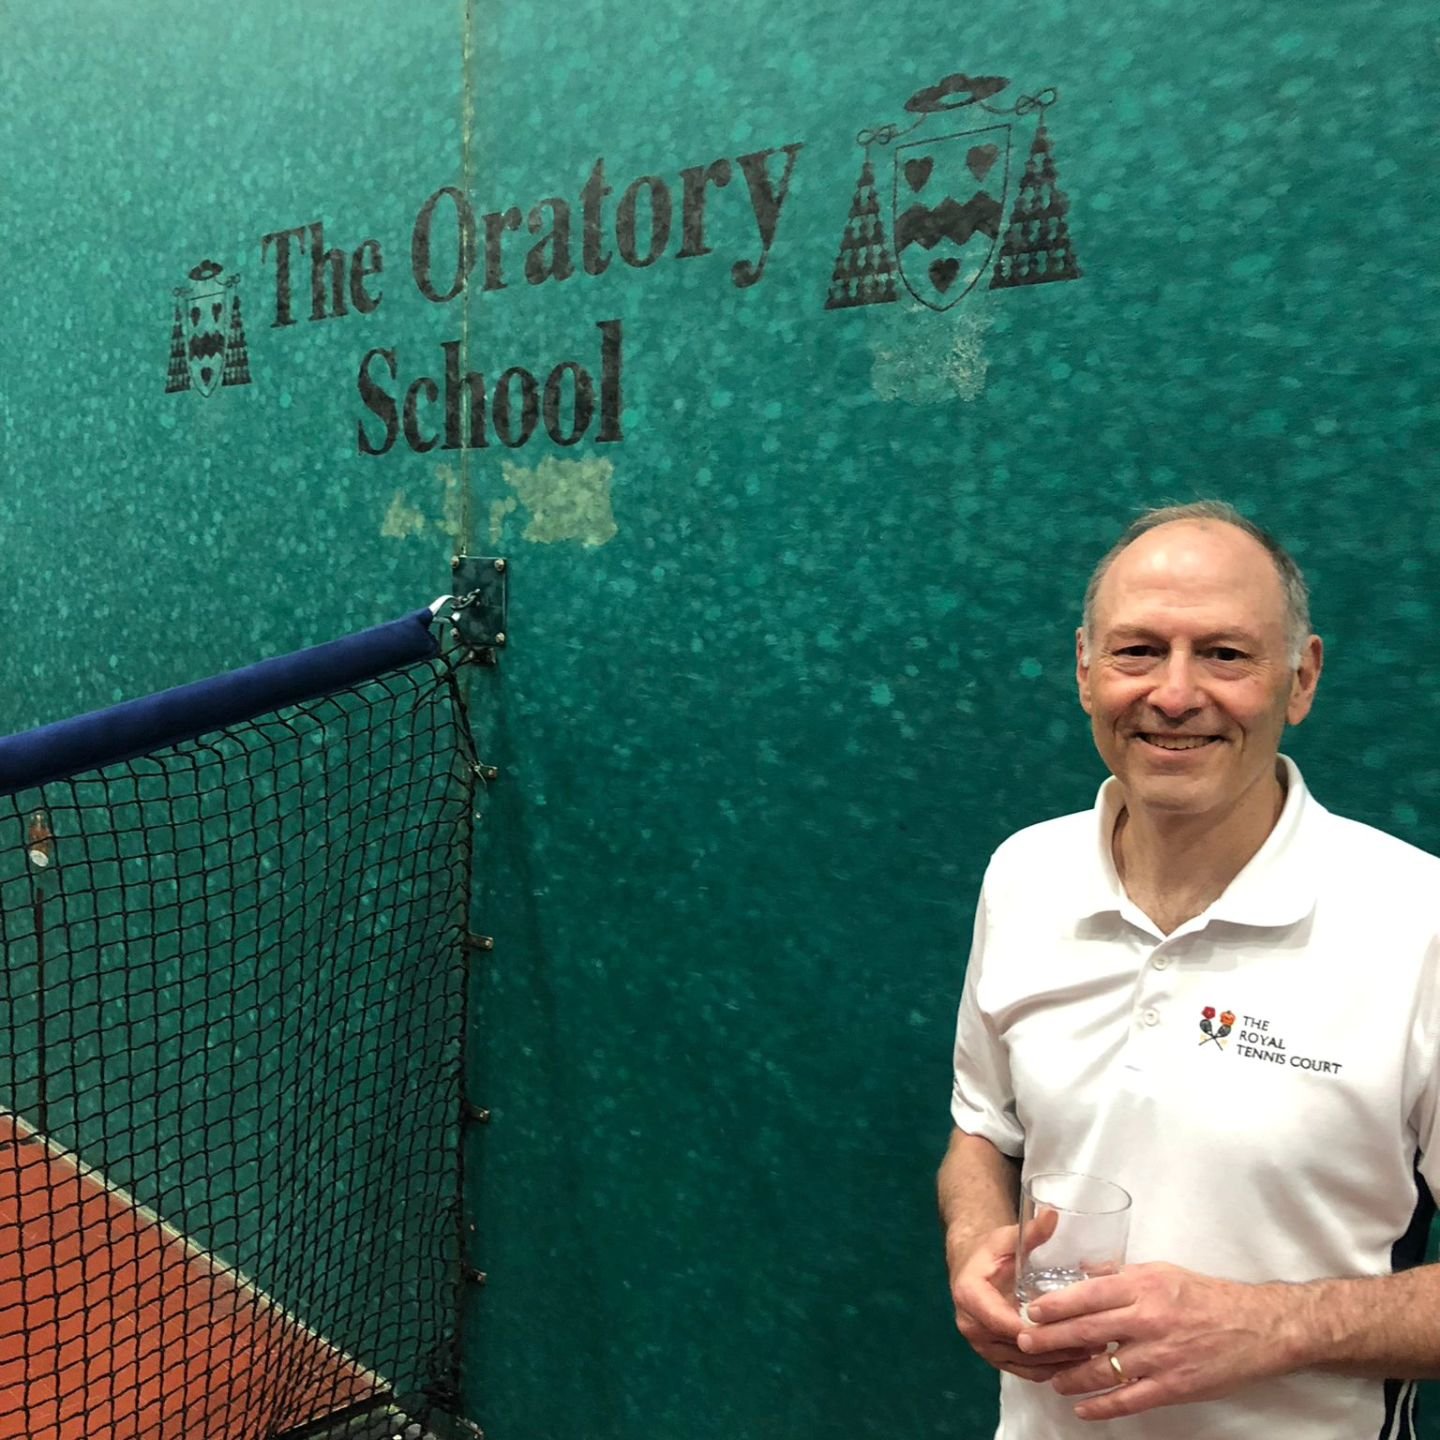 Our Chair Doug Sheperdigian won the Category G Championships at the Oratory earlier this month! Cat G is for those with a handicap of between 60-69.
It was an exhausting weekend of matches with Doug playing 7 full sets on the Sunday!
&ldquo;Lefty&rdq